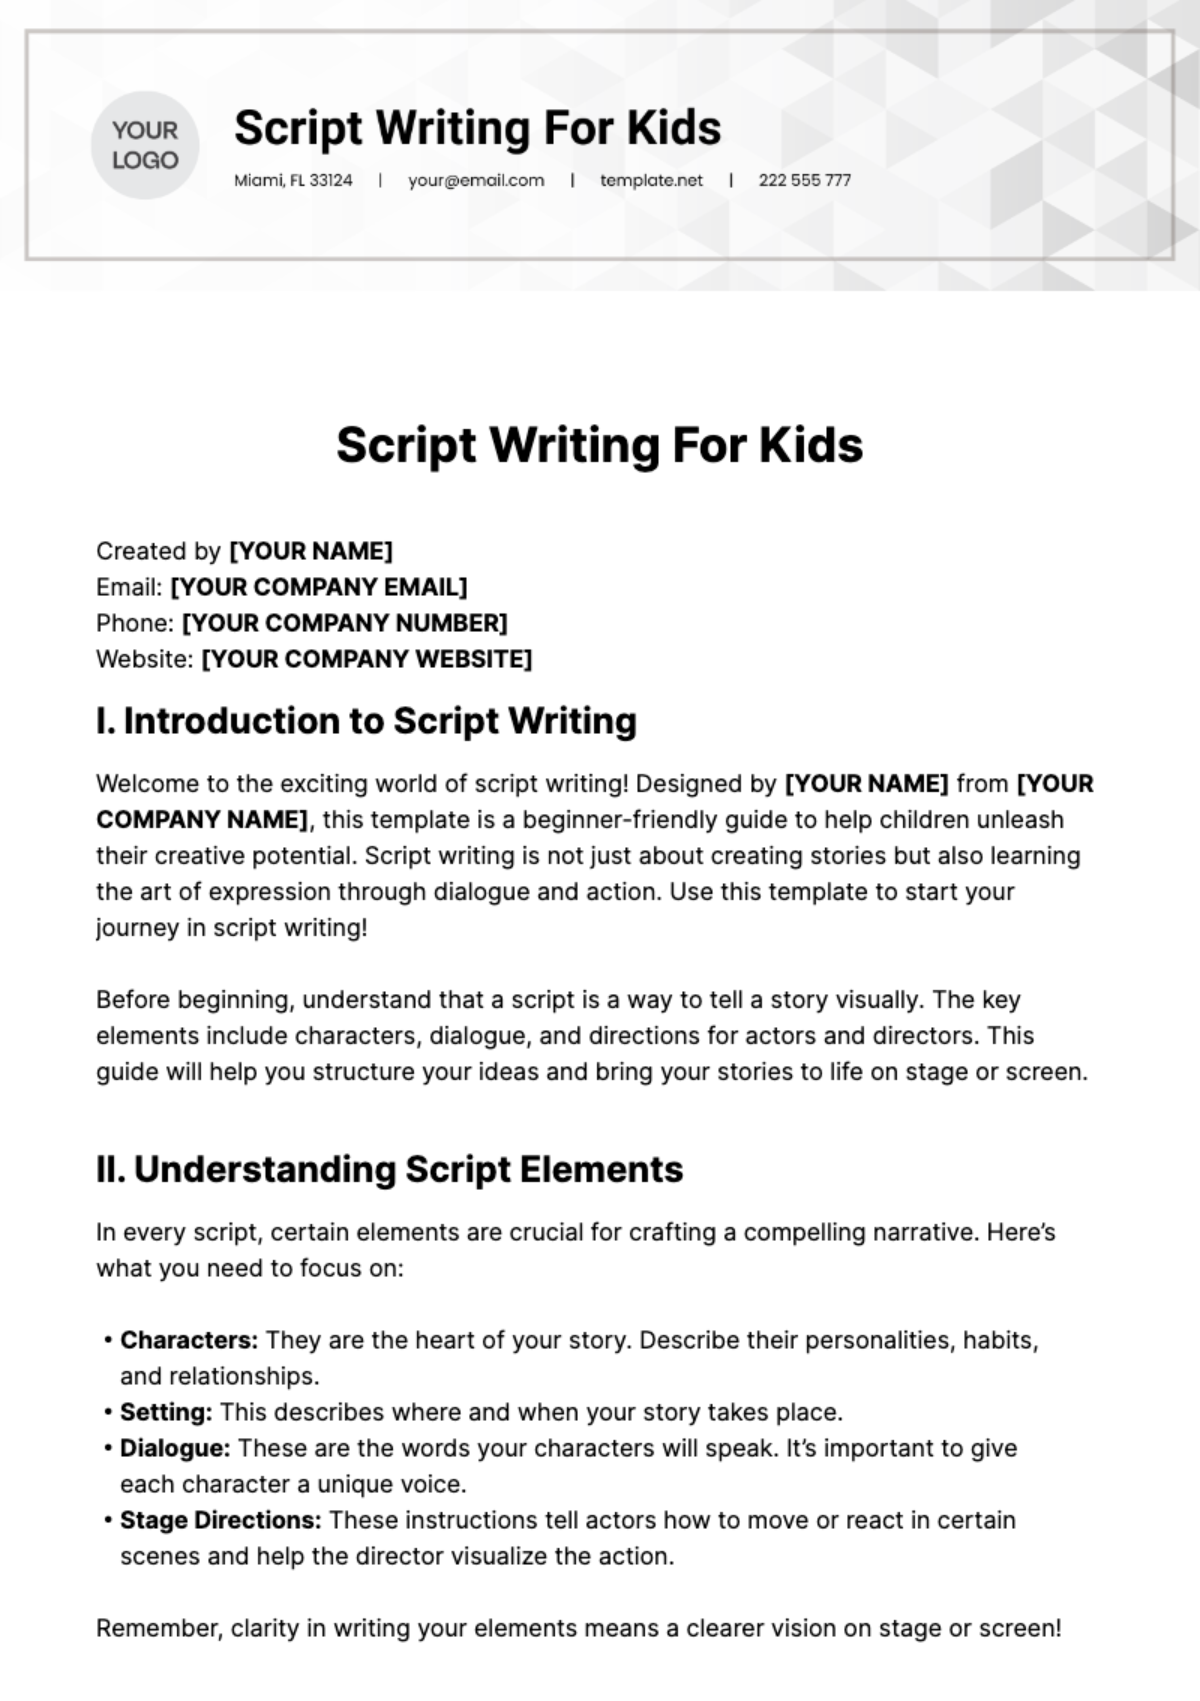 Script Writing For Kids Template